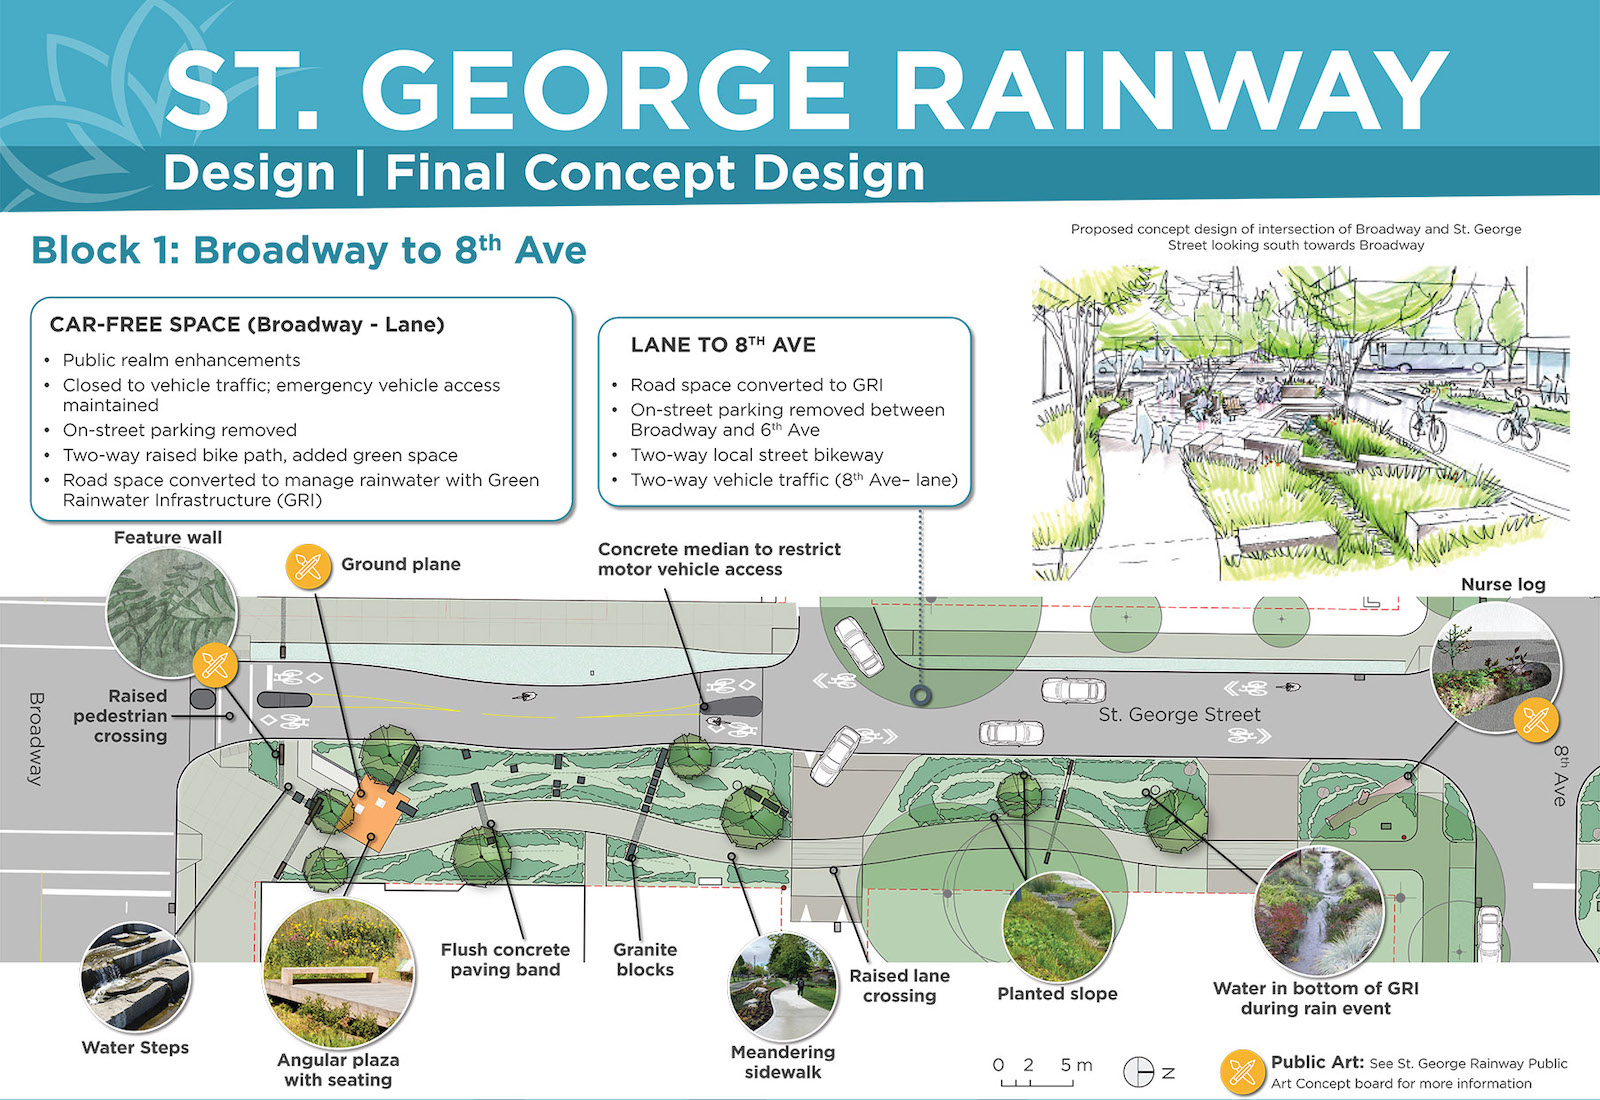 A slide that shows the concept for the rainway from above, with a vegetated stream running down one side of the street. There is bike access on the road while cars are being diverted elsewhere. Sprinkled throughout the stretch of the rainway are goodies like logs to sit on and a mini plaza.